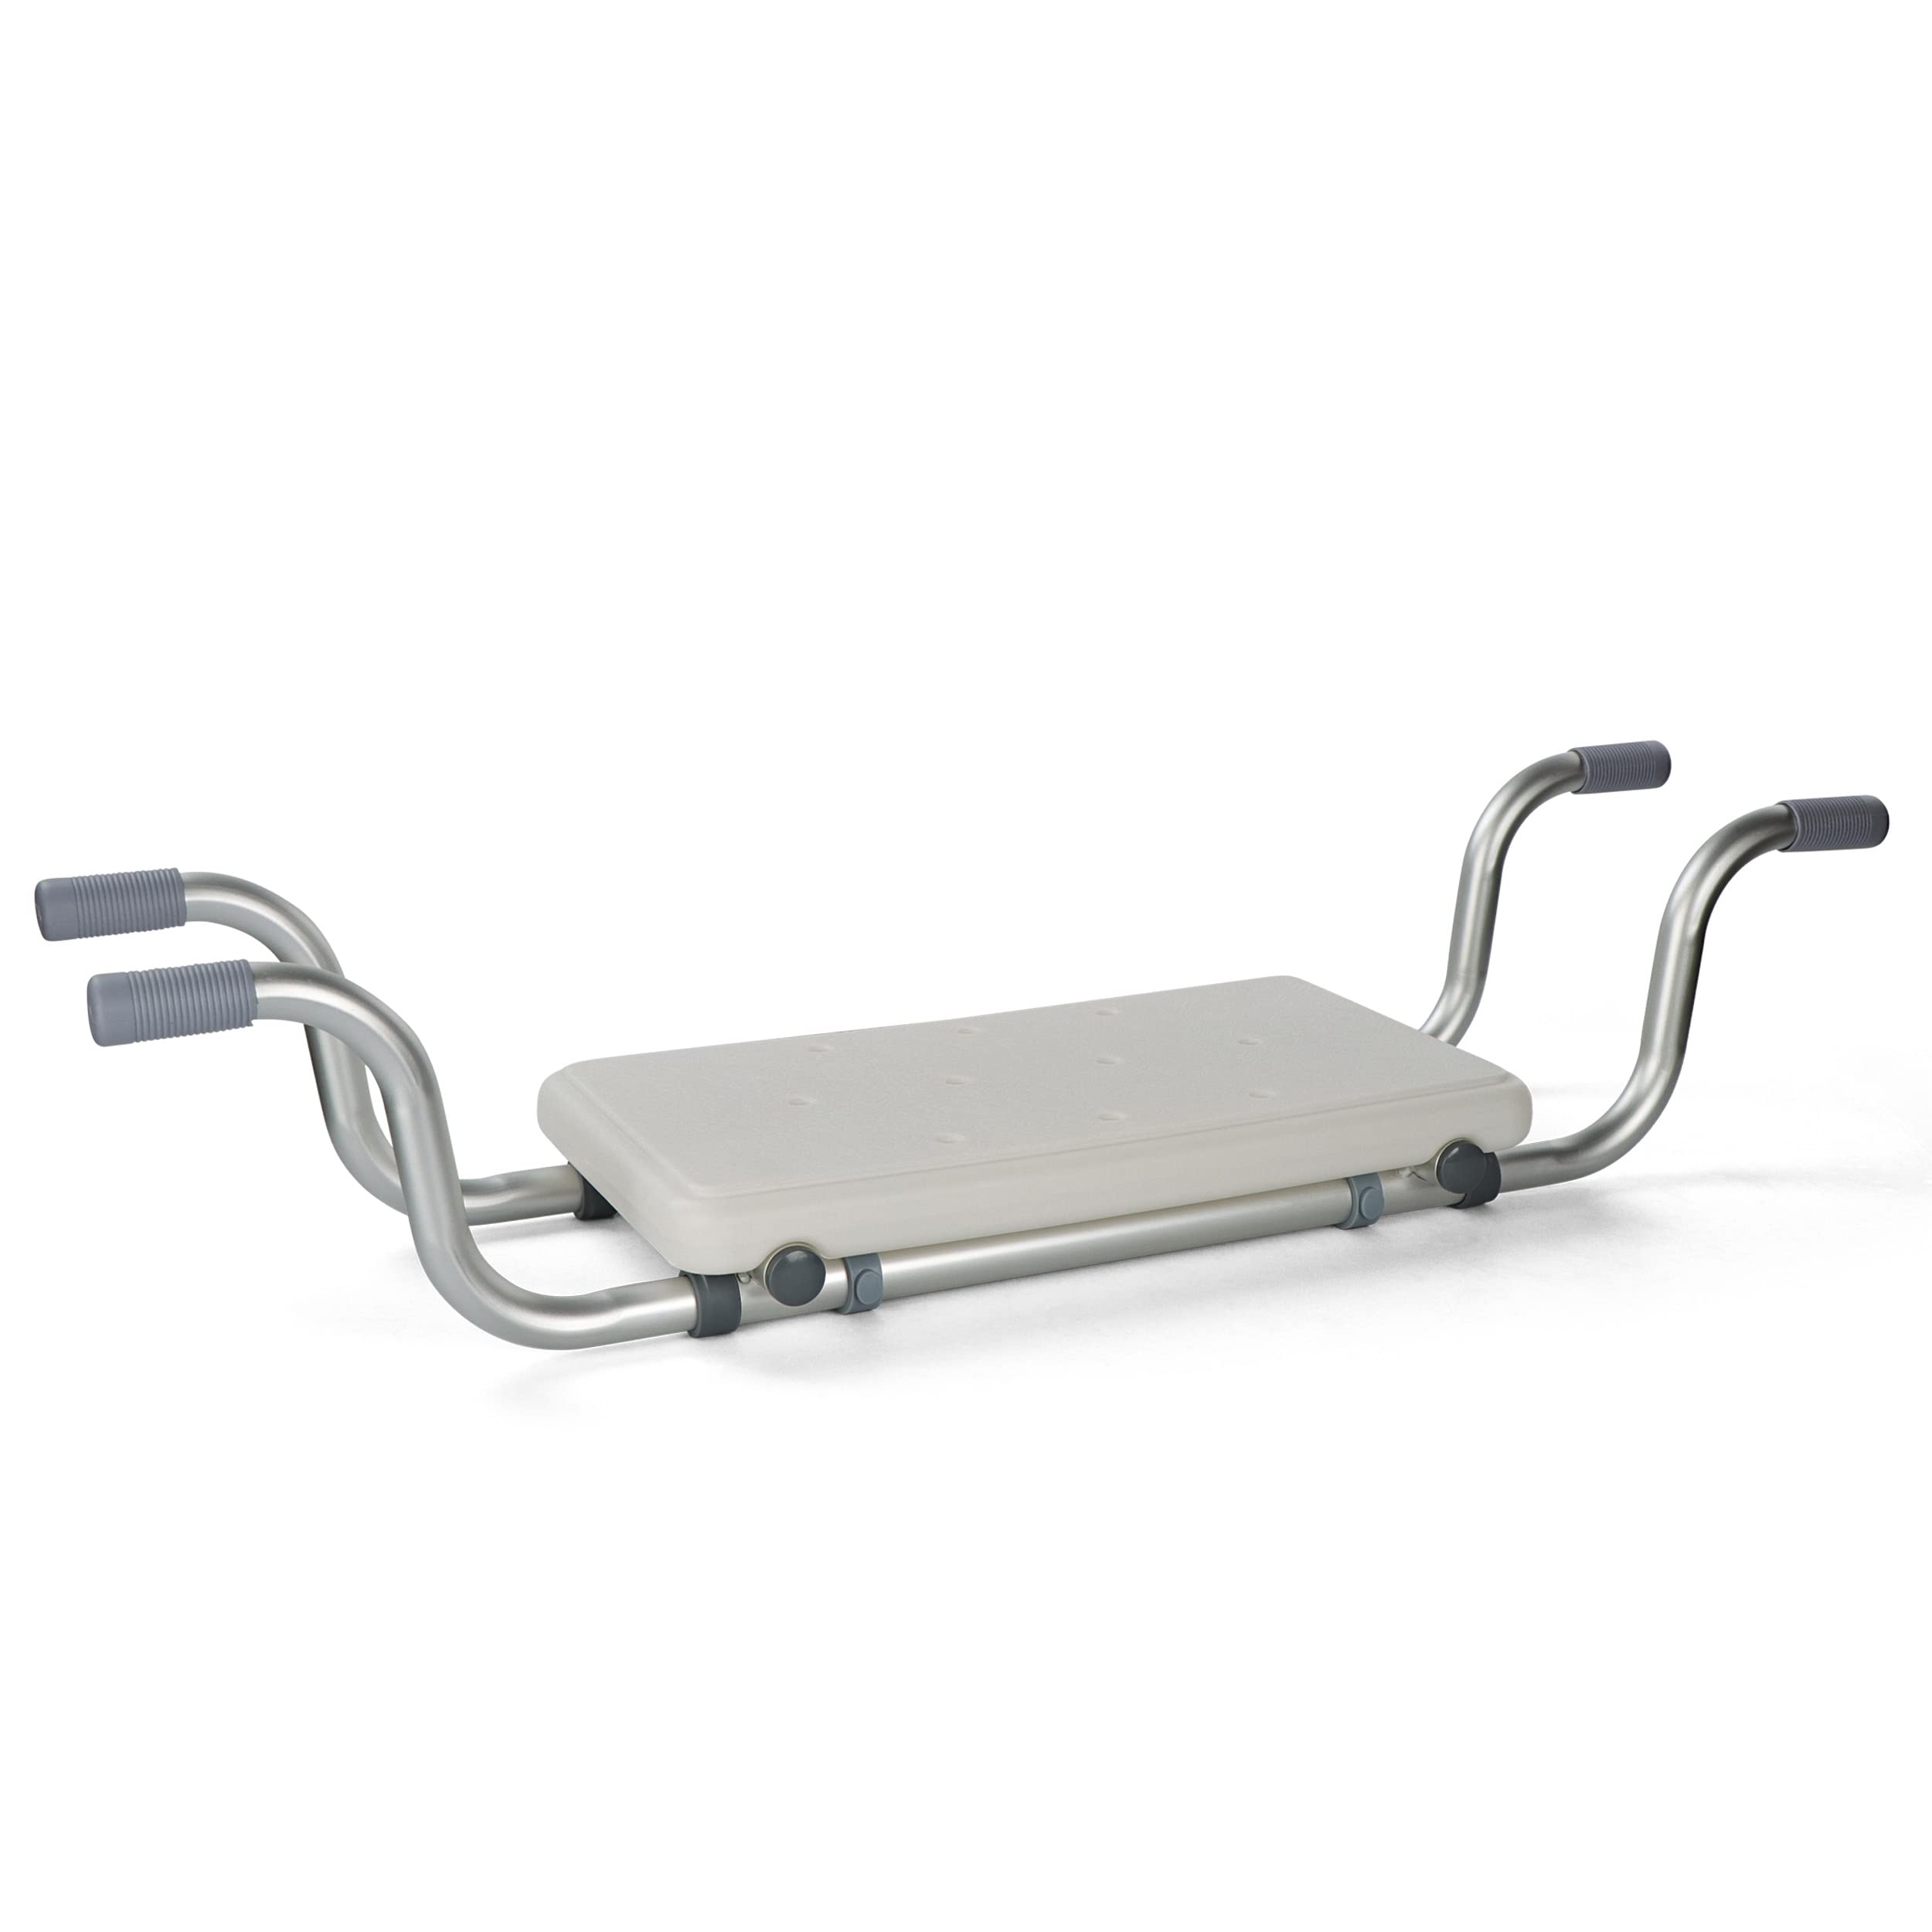 Mondo Medical Adjustable Shower Bench Seat - 330lb Capacity Across Tub Suspended Bath Bench for Elderly and Disabled